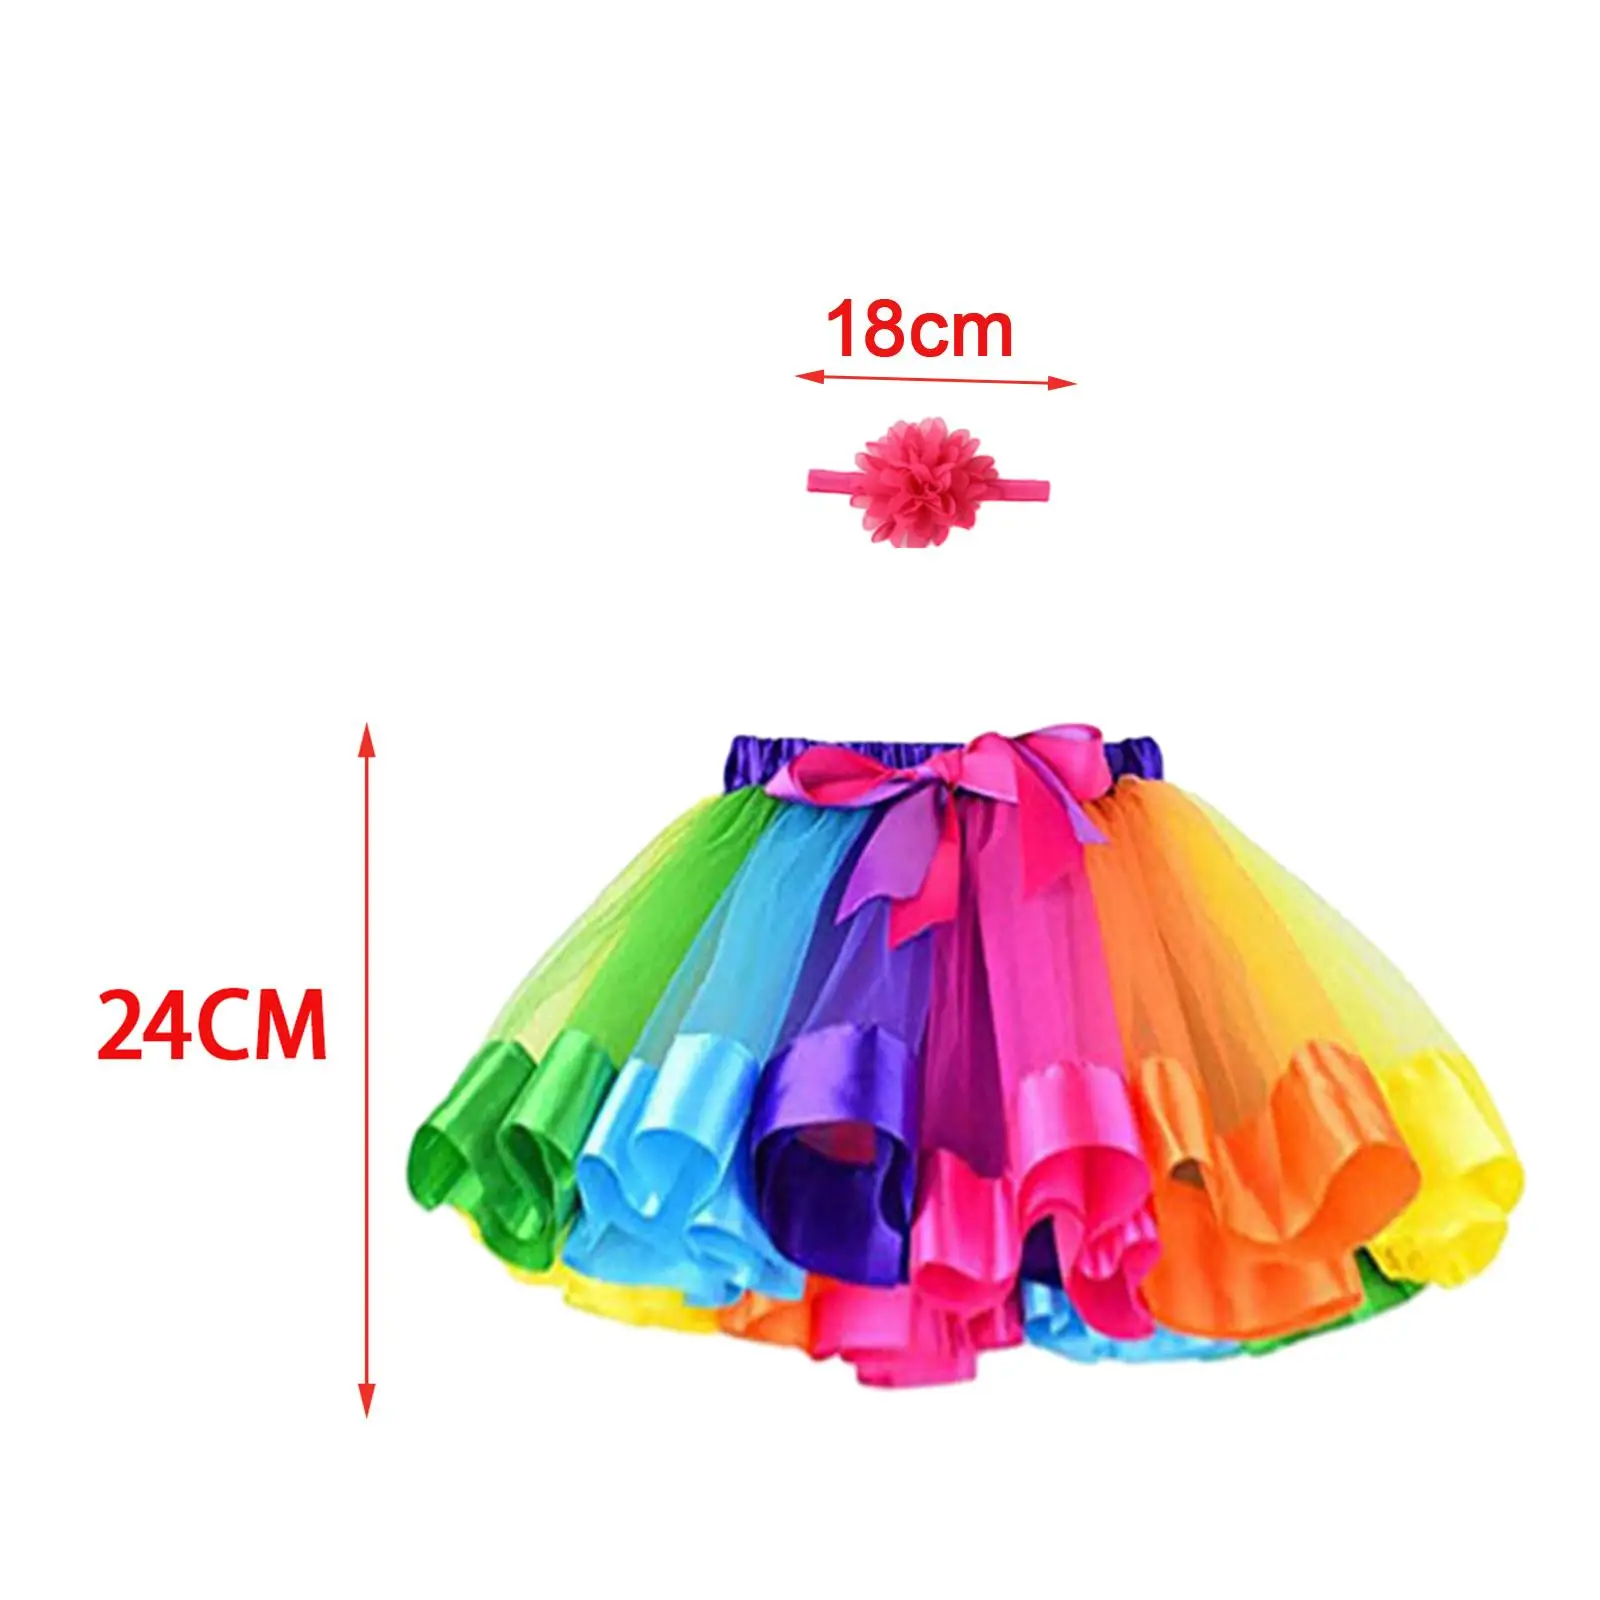 Girls Fairy Costume Cosplay Wing Butterfly Wing Costume Skirt Apparel Outfit Princess Cosplay for Carnival Festival